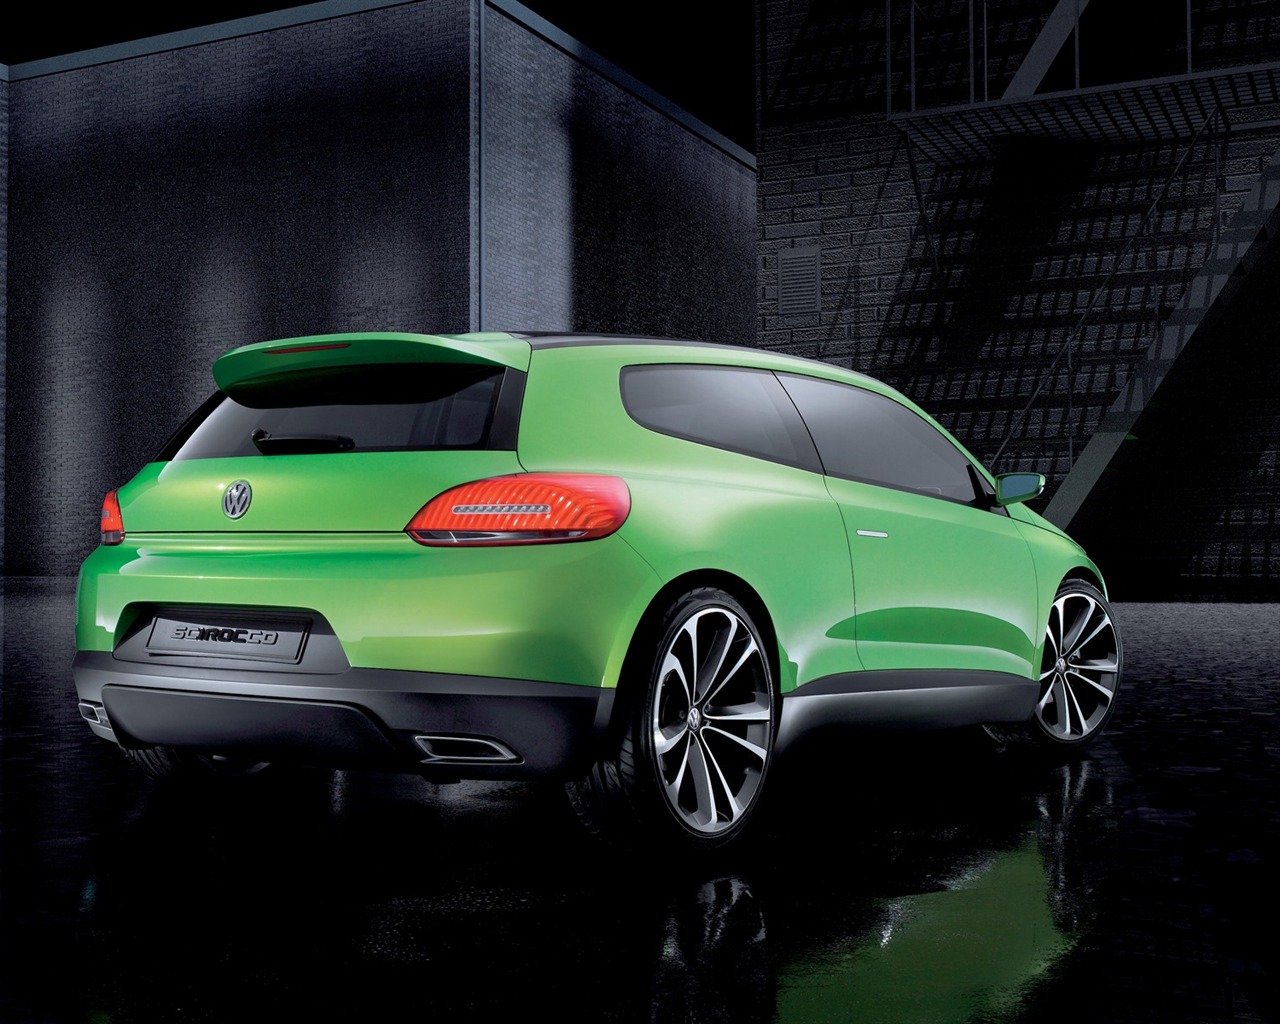 Volkswagen Concept Car tapety (2) #4 - 1280x1024